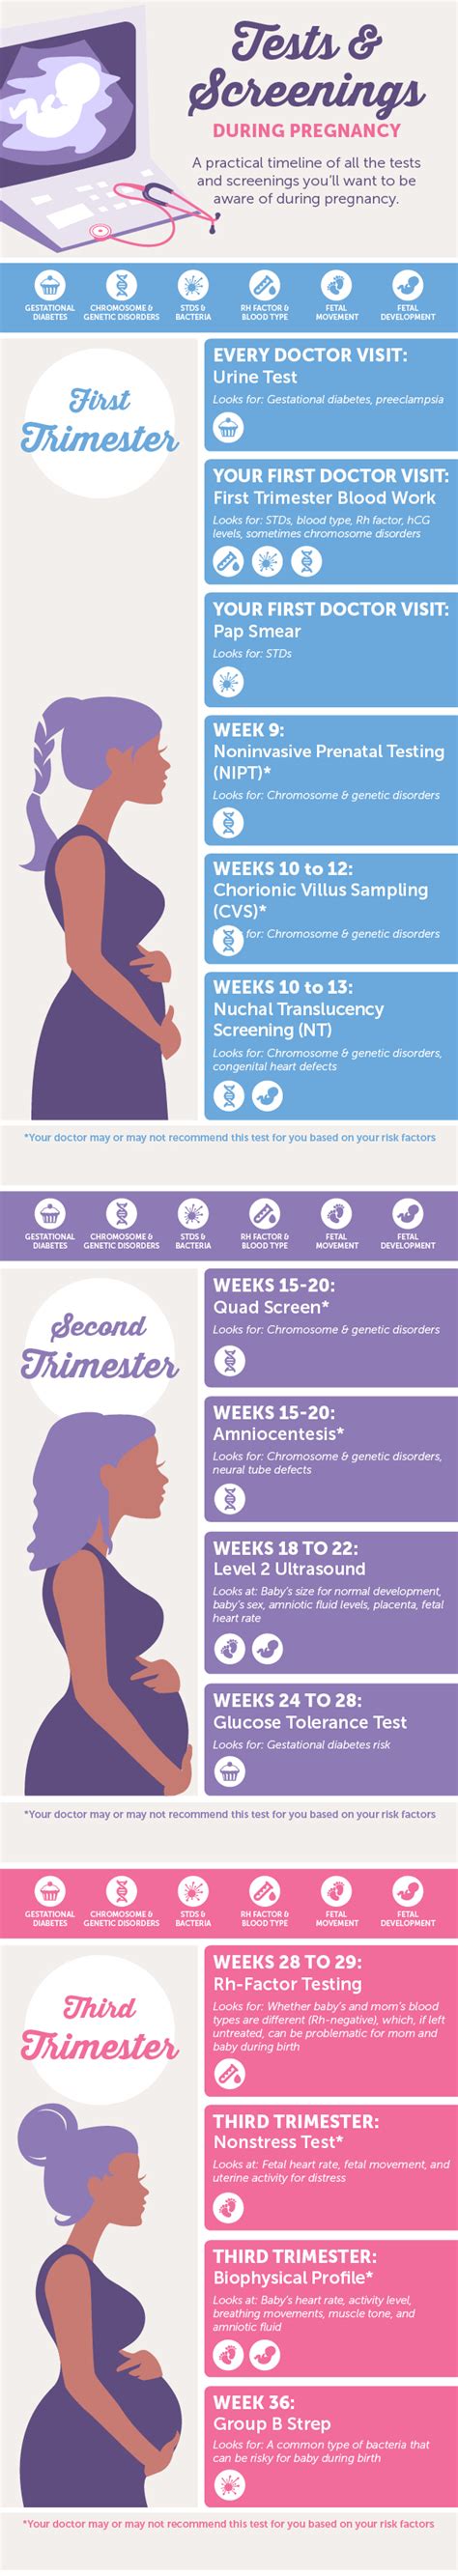 Infographic Pregnancy Tests And Screenings